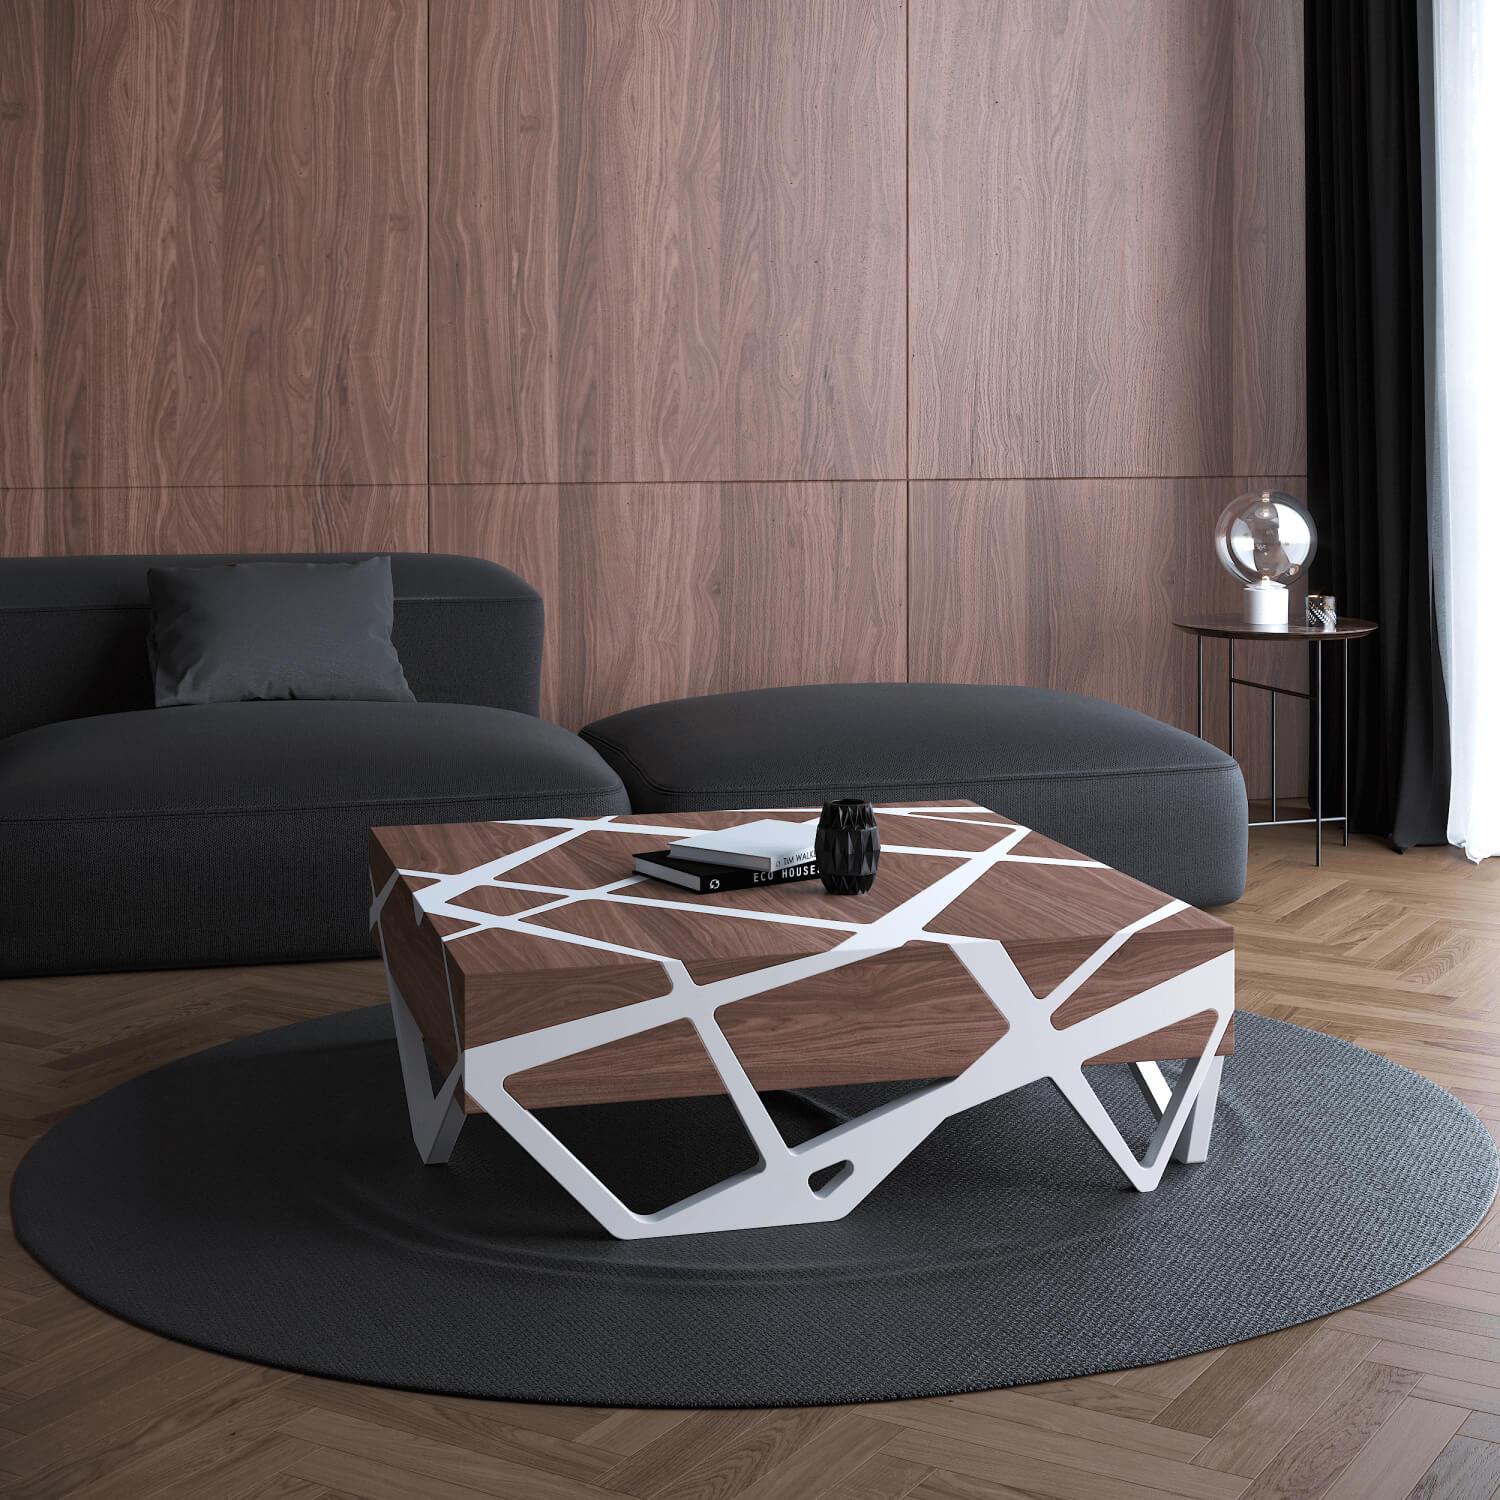 Organic Modern Accent Square Center Coffee Table Walnut Wood White Lacquer (table basse carrée d'accent) en vente 8